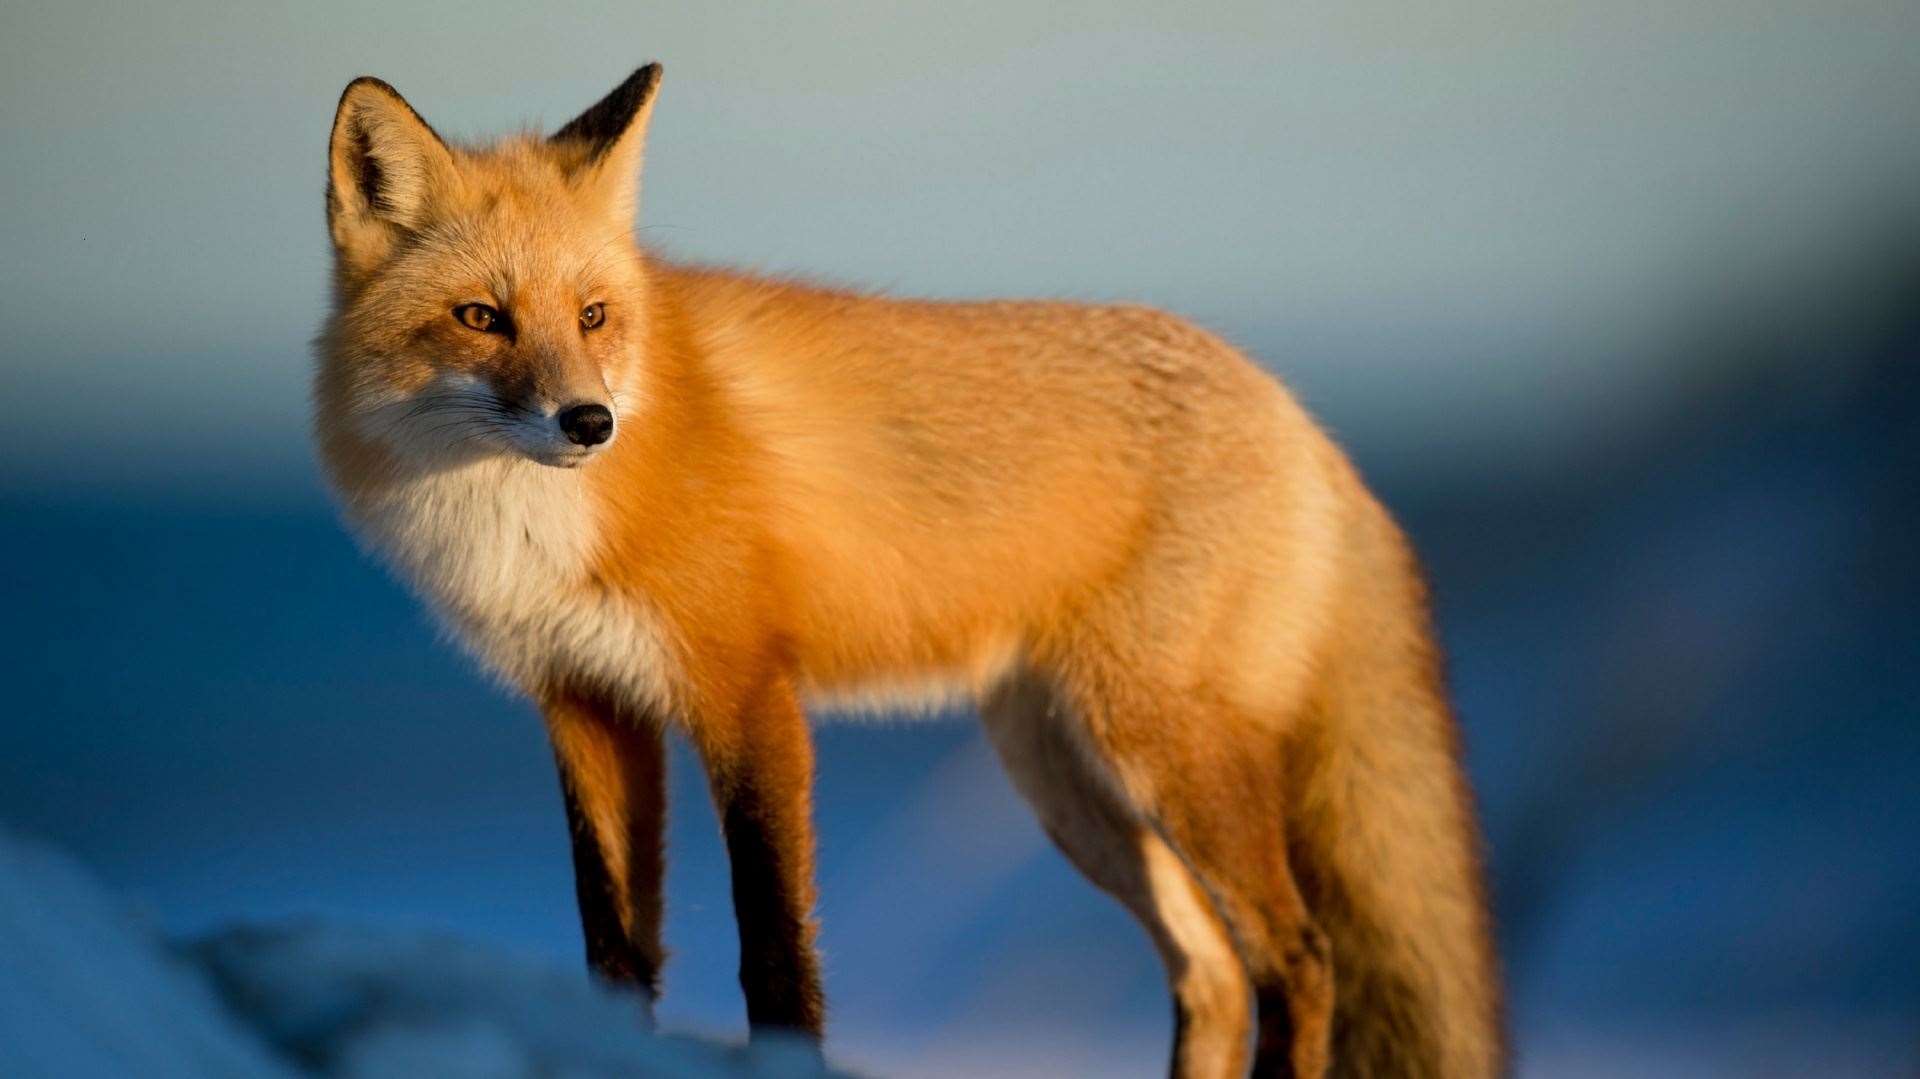 It is hoped that the new Bill will help protect foxes from sport hunting.